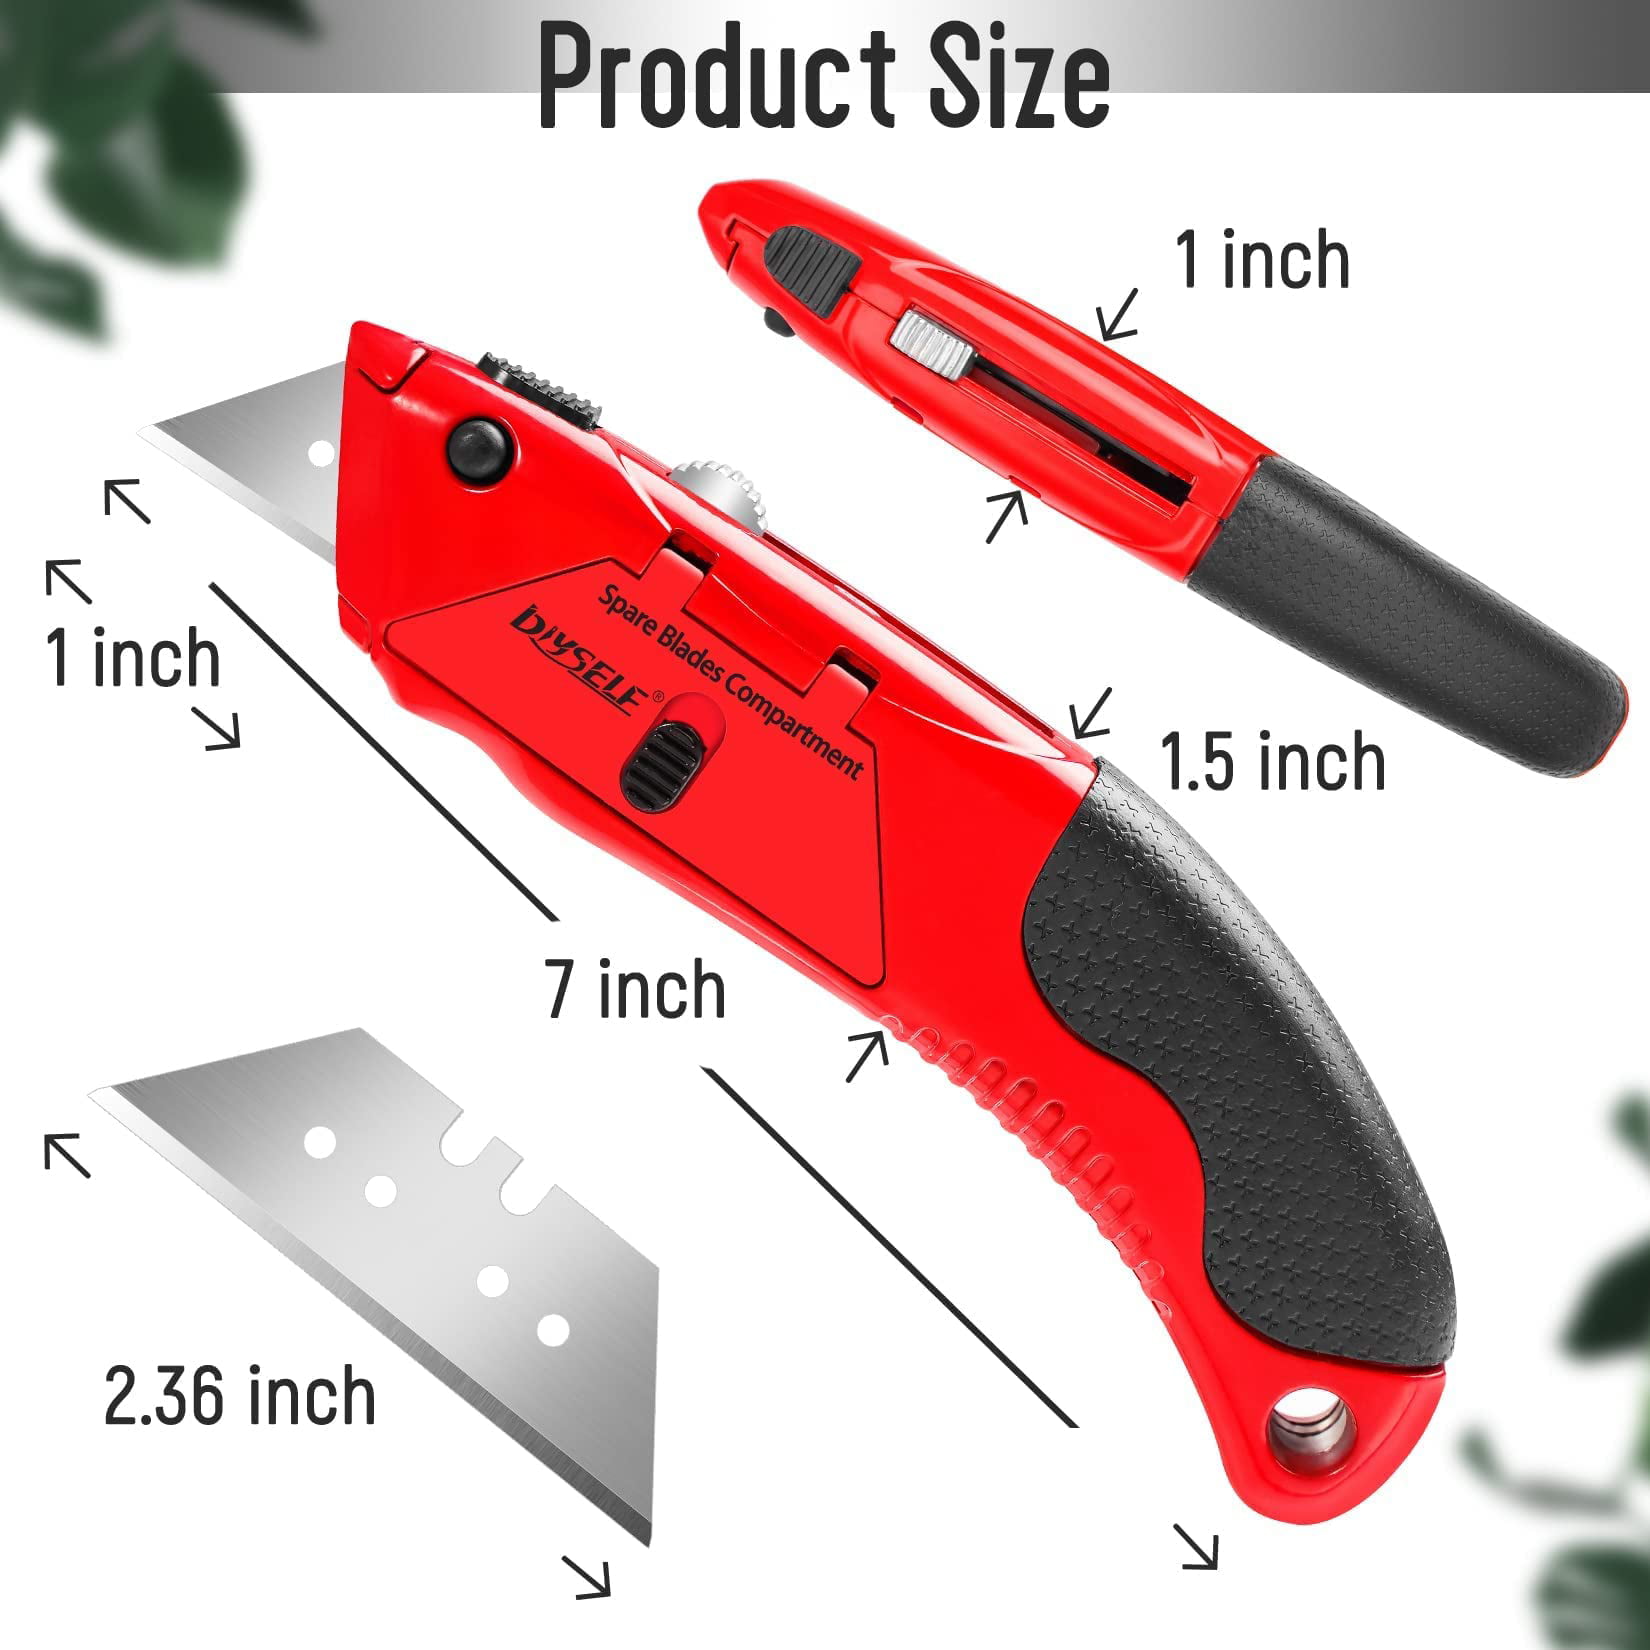 DIYSELF 4 Pack Box Cutter, Box Cutter Retractable for Cardboard, Papers and  Plastics. 18mm and 9mm Utility Knife, Razor Knife, Portable Utility Knives  Efficient for DIY and Work Use, Retractable Knife 